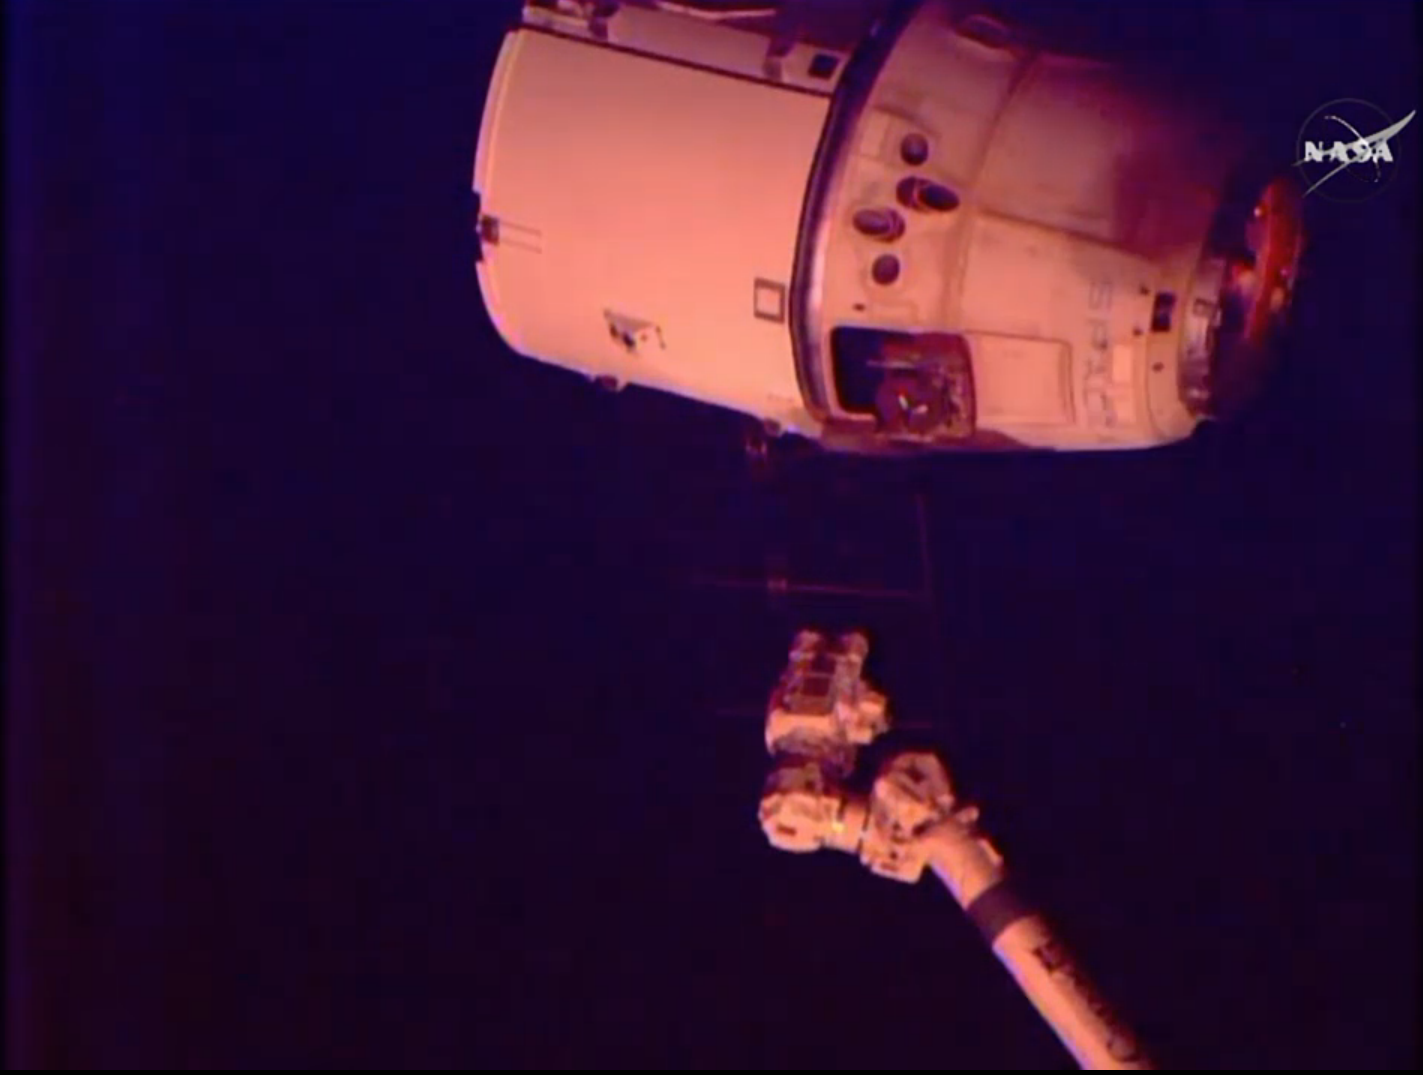 SpaceX Dragon cargo spacecraft was released from the International Space Station's robotic arm at 7:04 a.m. EDT